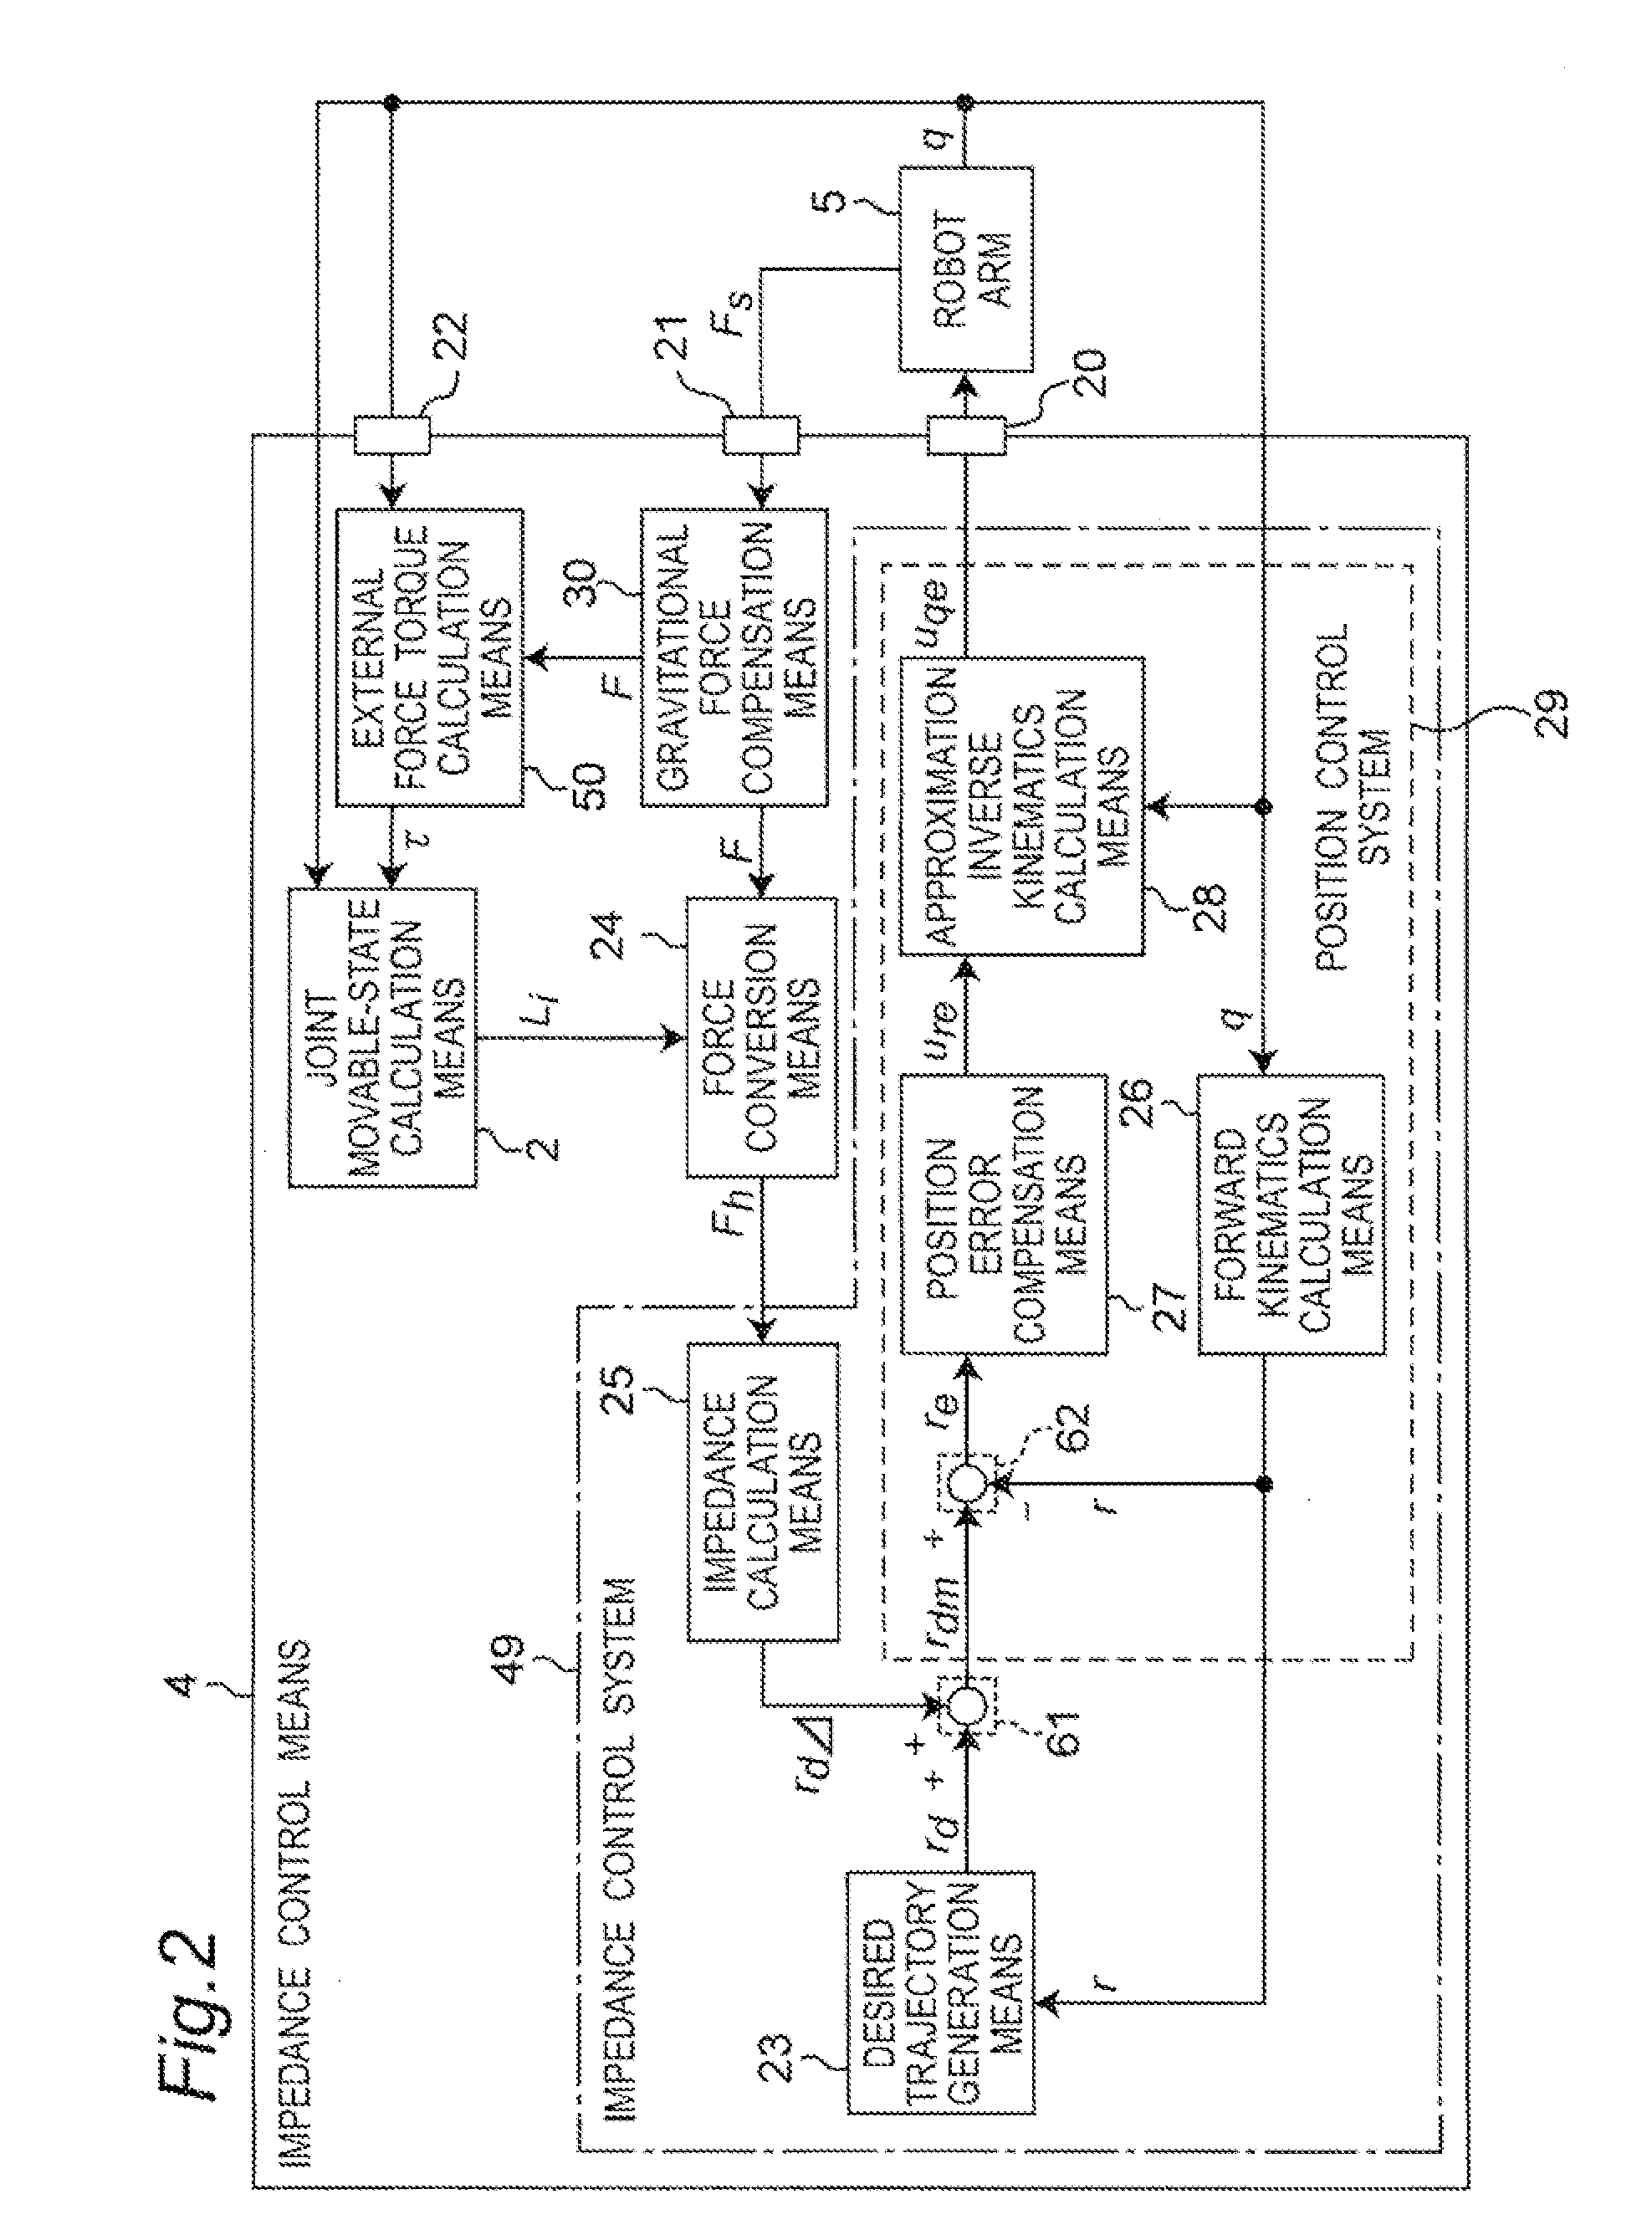 Robot, control device for robot, and control method of robot